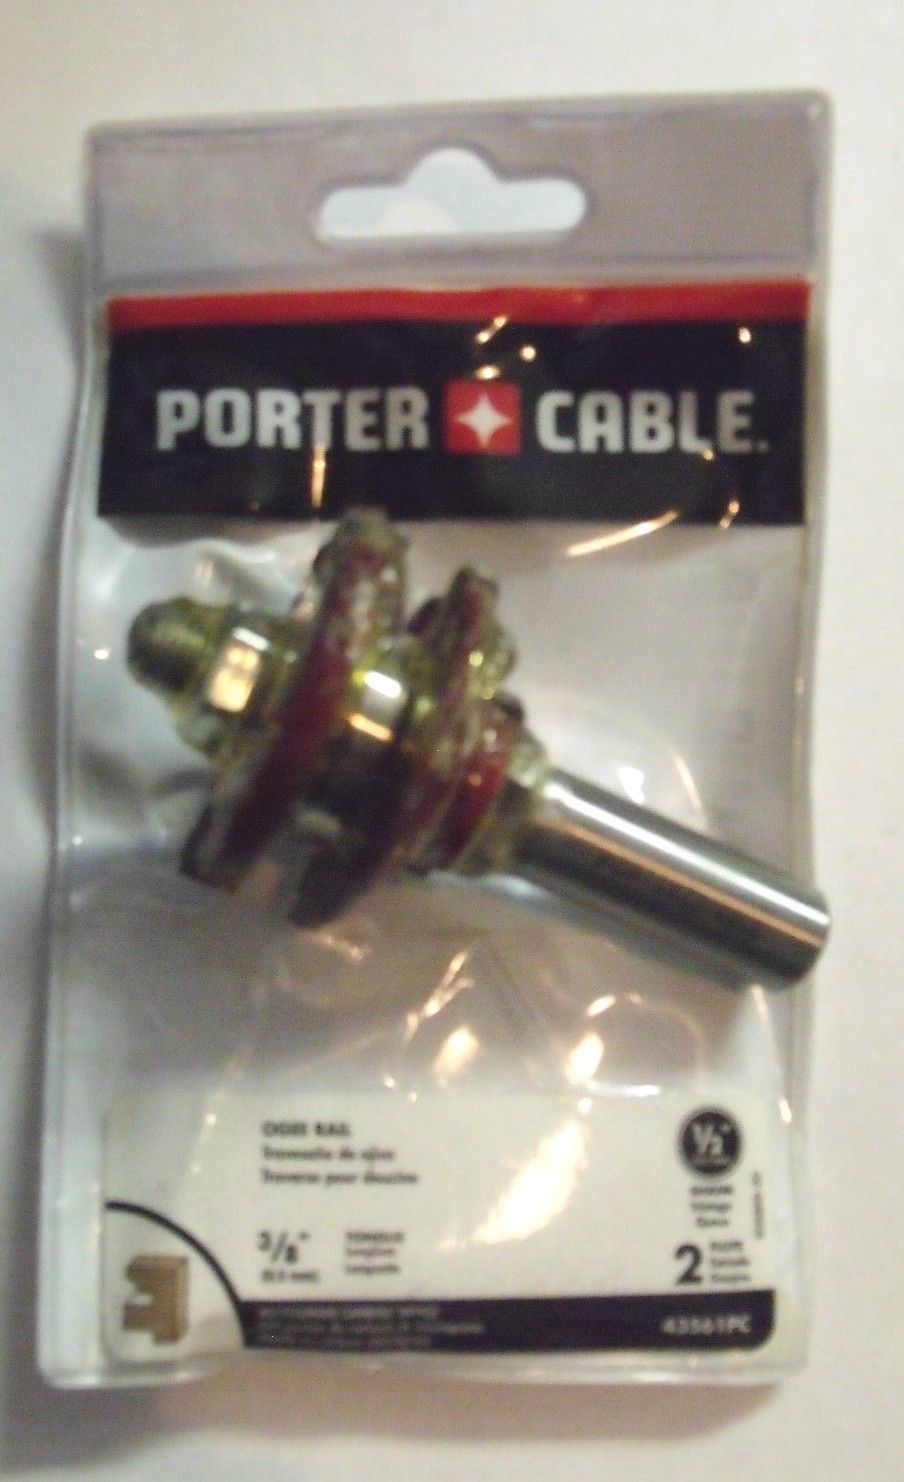 Porter Cable 43561PC 3/8" Tongue Ogee Rail Router Bit 1/2" Shank - $23.76